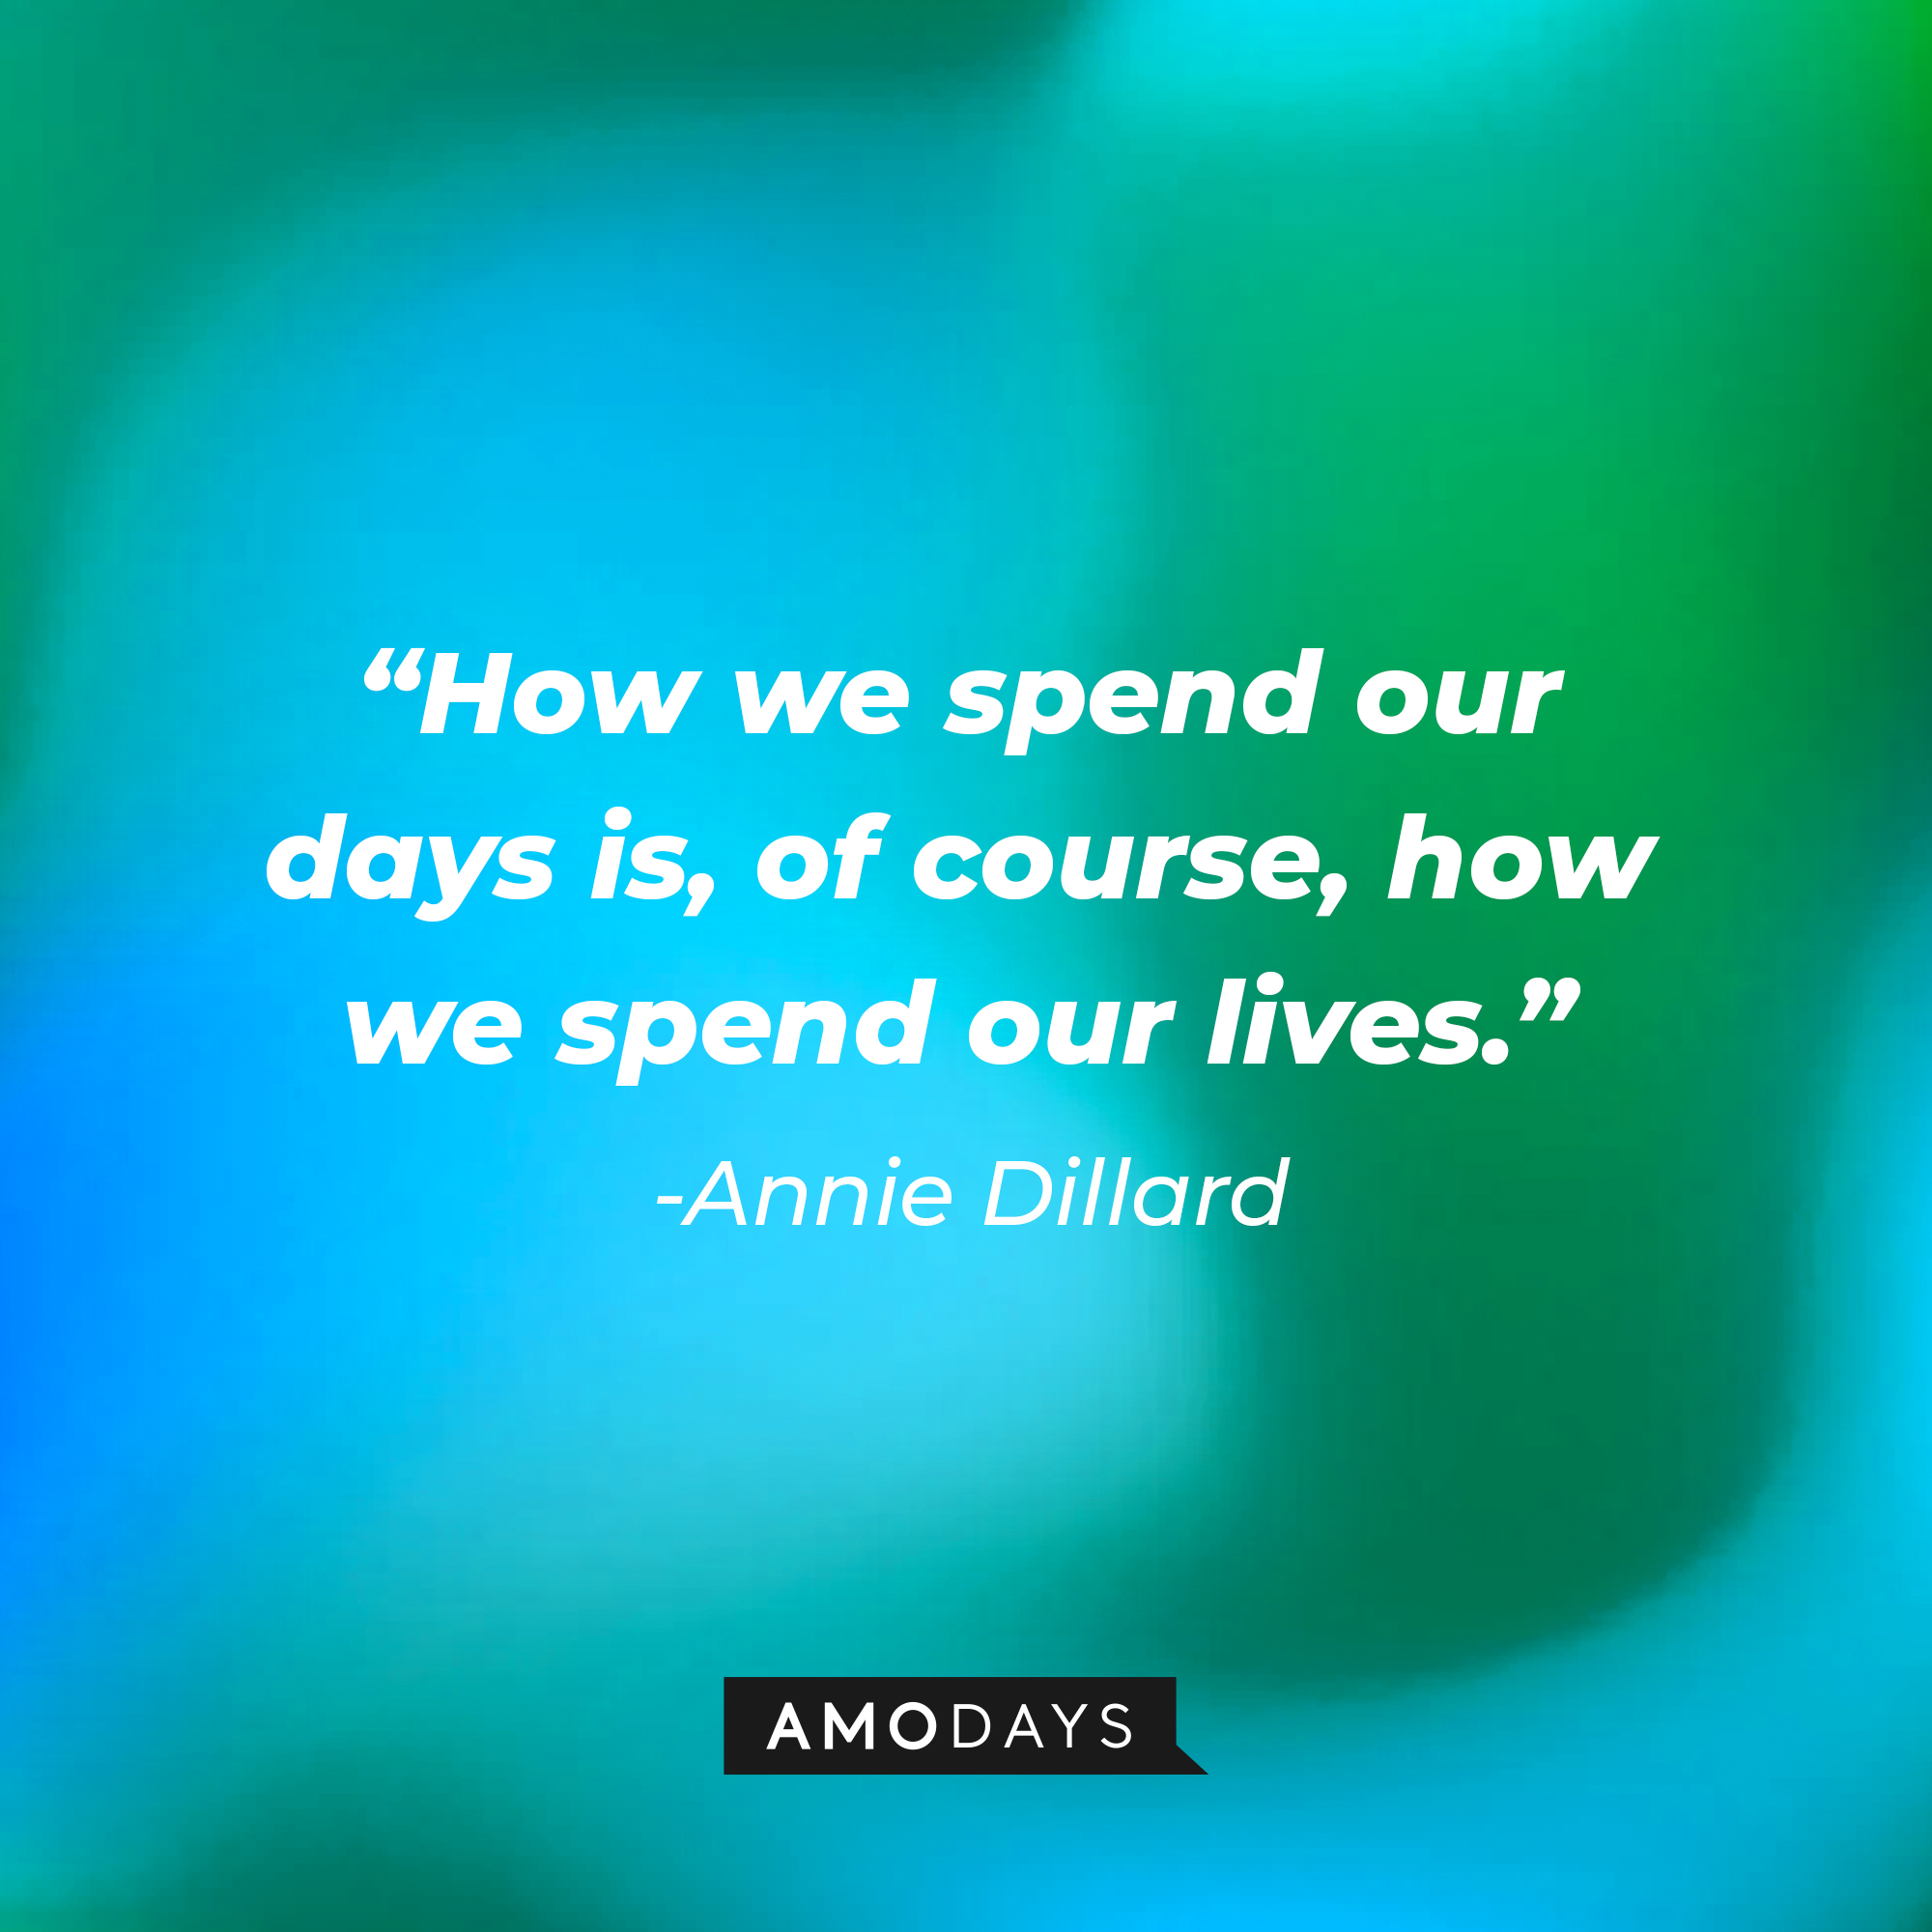 Annie Dillard’s quote: "How we spend our days is, of course, how we spend our lives." | Image: Amodays